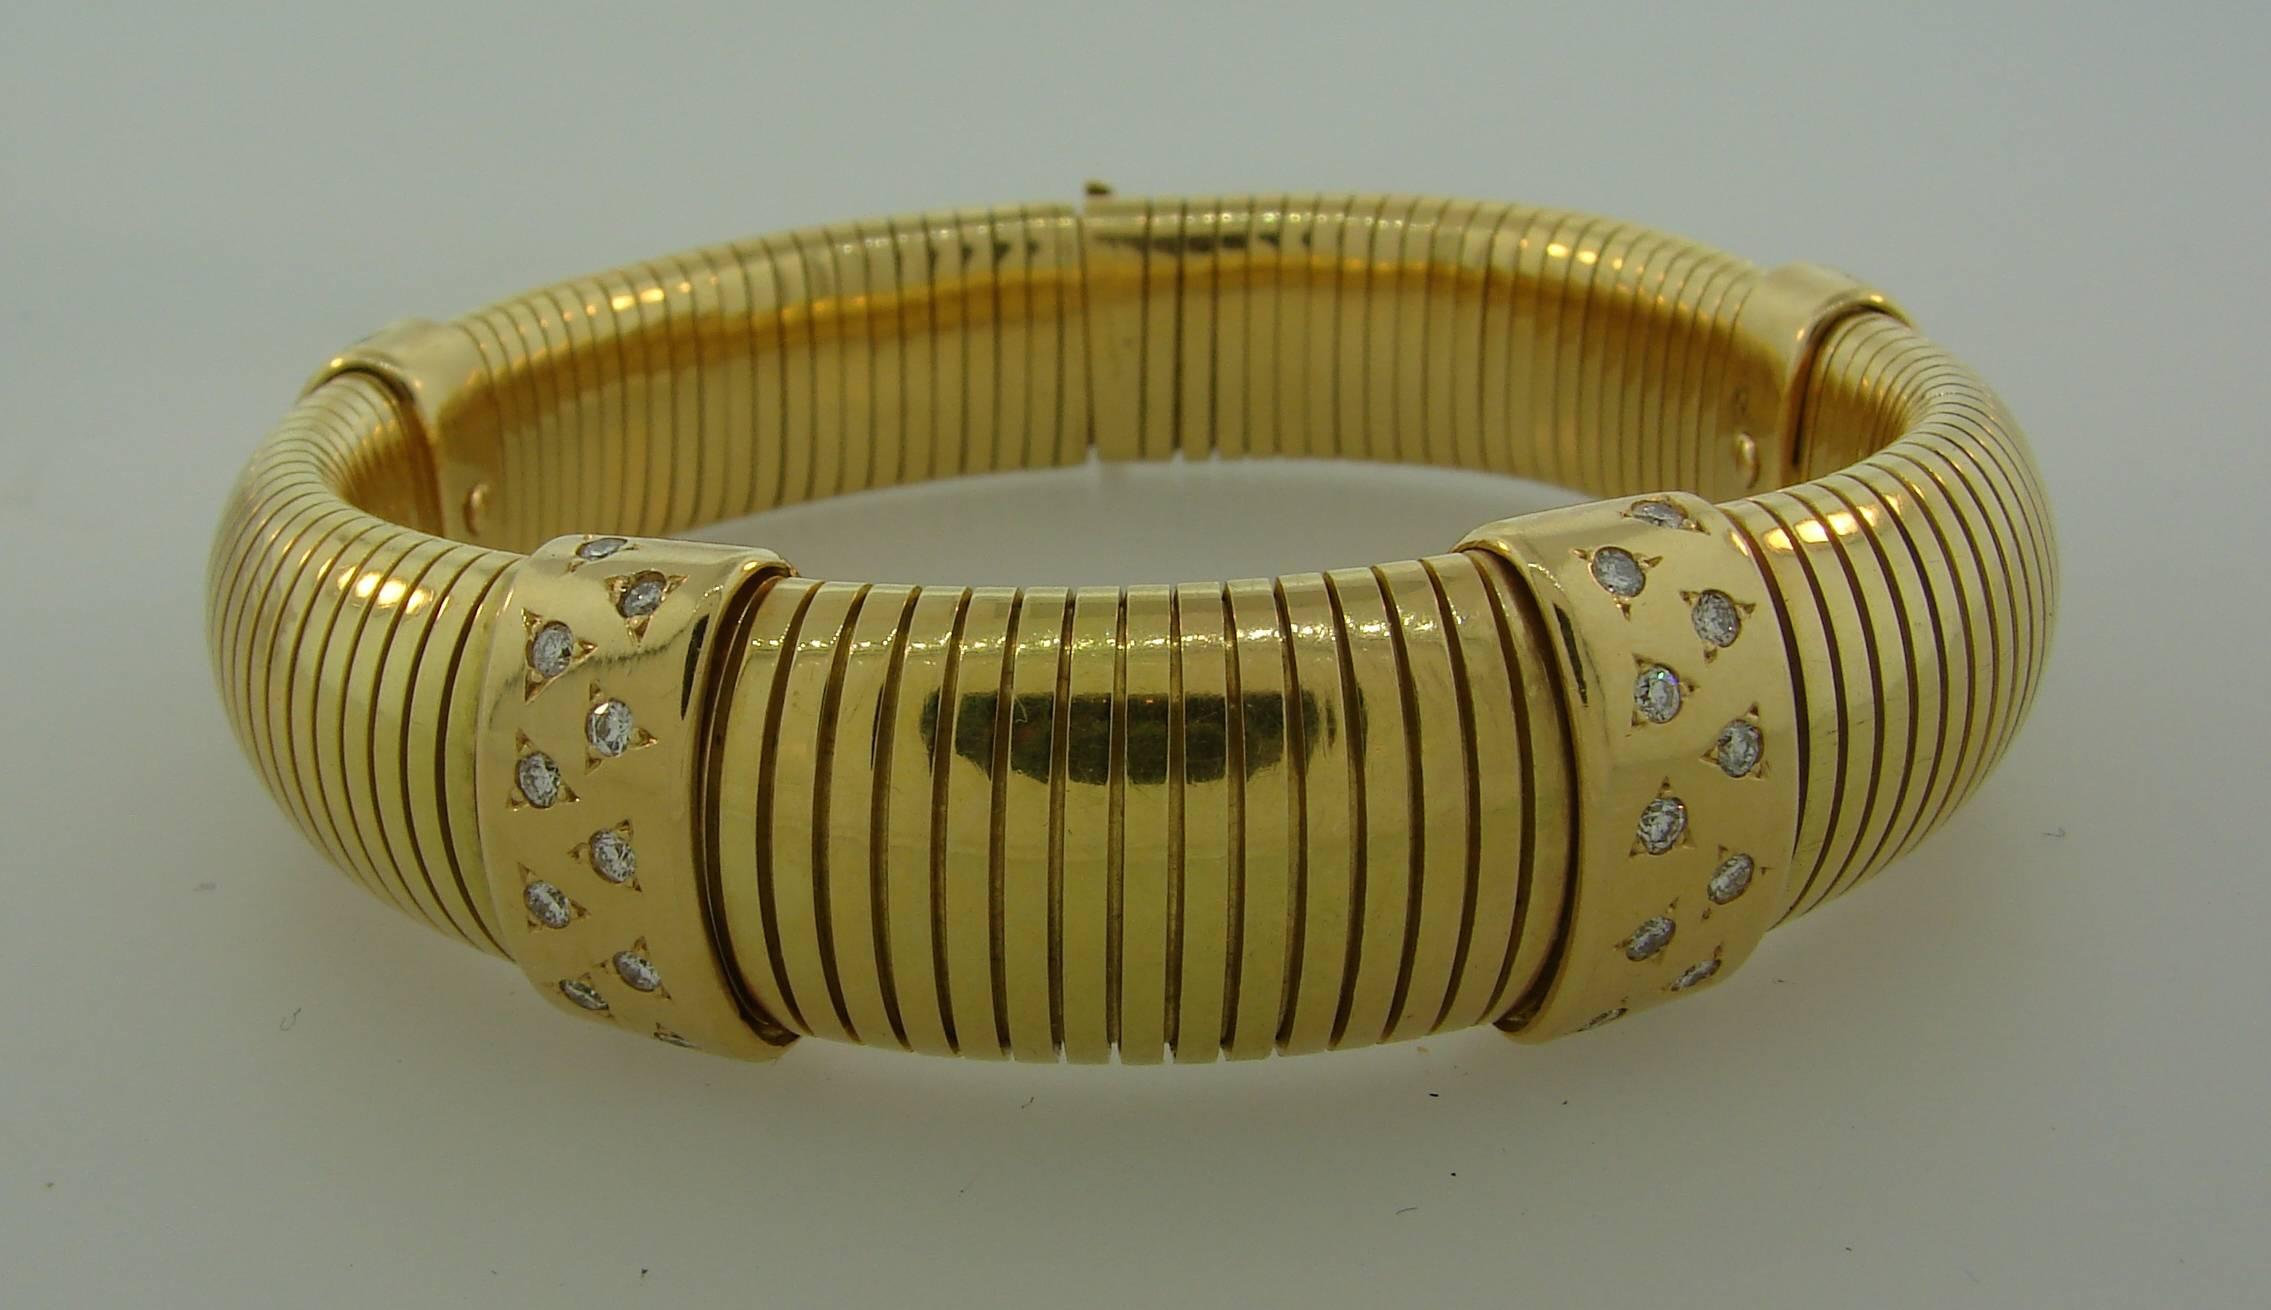 Elegant and timeless tubogas bracelet that is a great addition to your jewelry collection. Created by Cartier in Paris in the 1970's. Made of 18 karat yellow gold and accented with round brilliant cut diamonds (total weight approximately 0.80